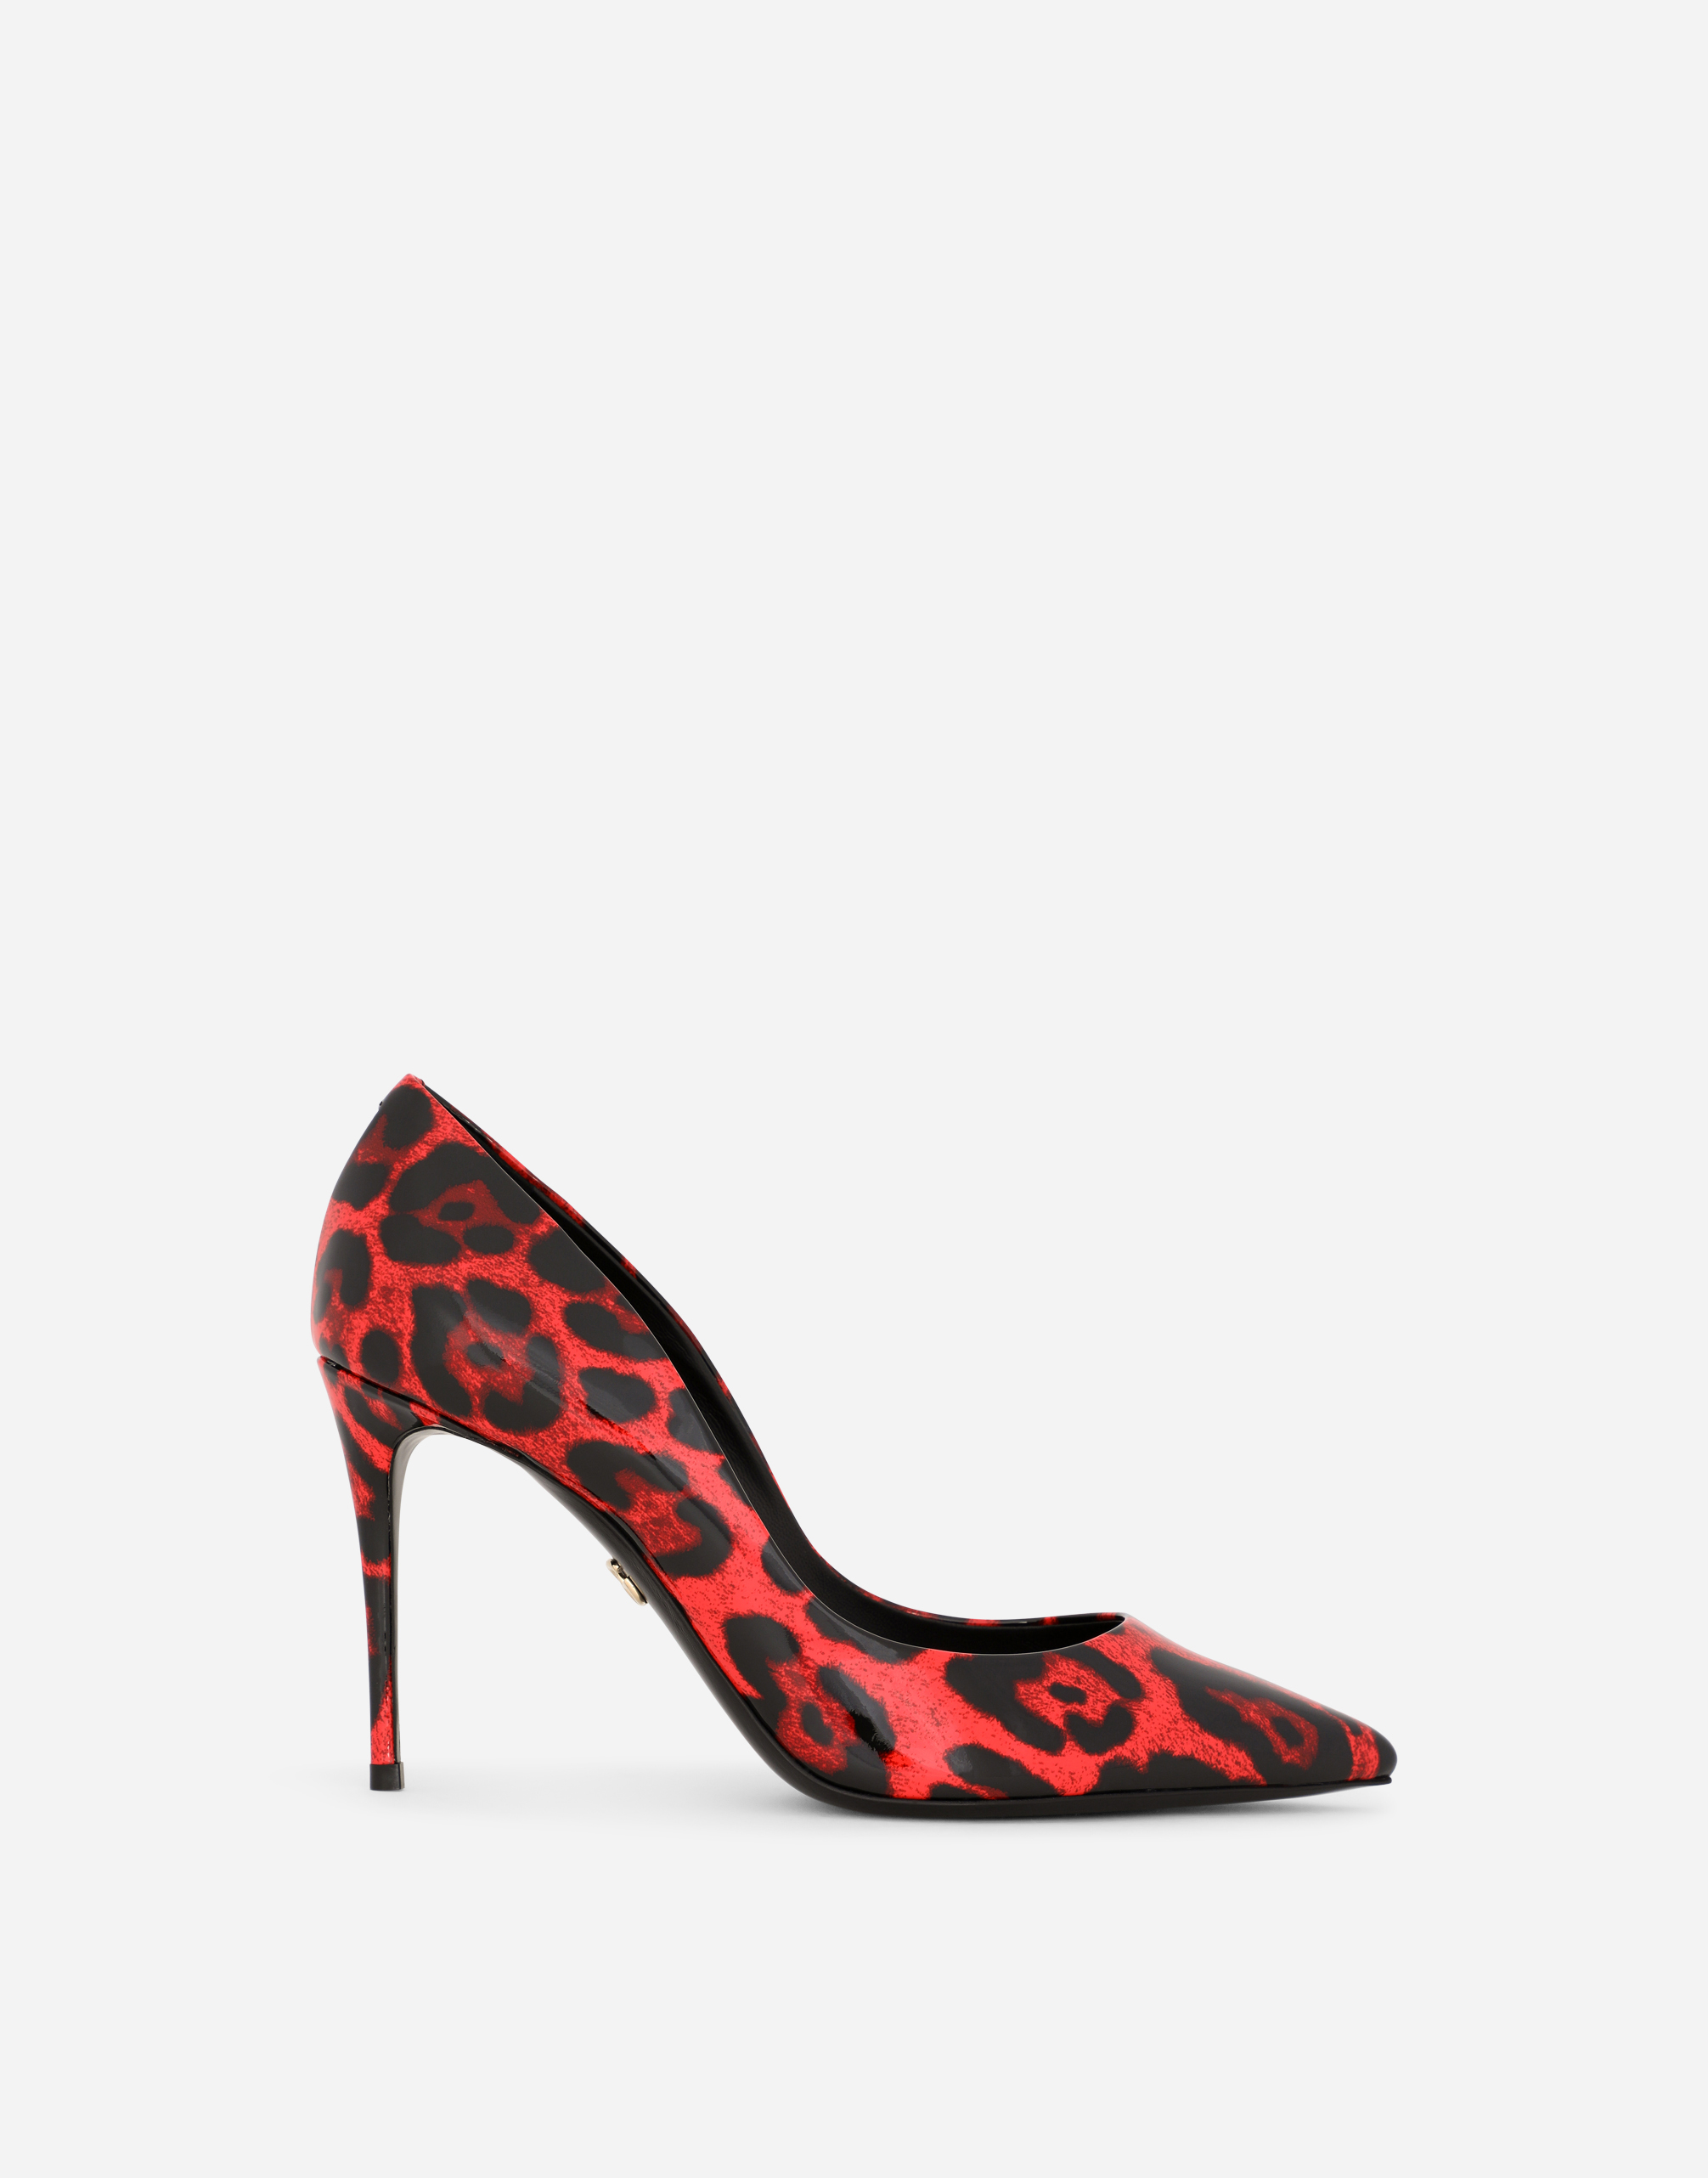 Pumps in red leopard-print patent leather in Multicolor